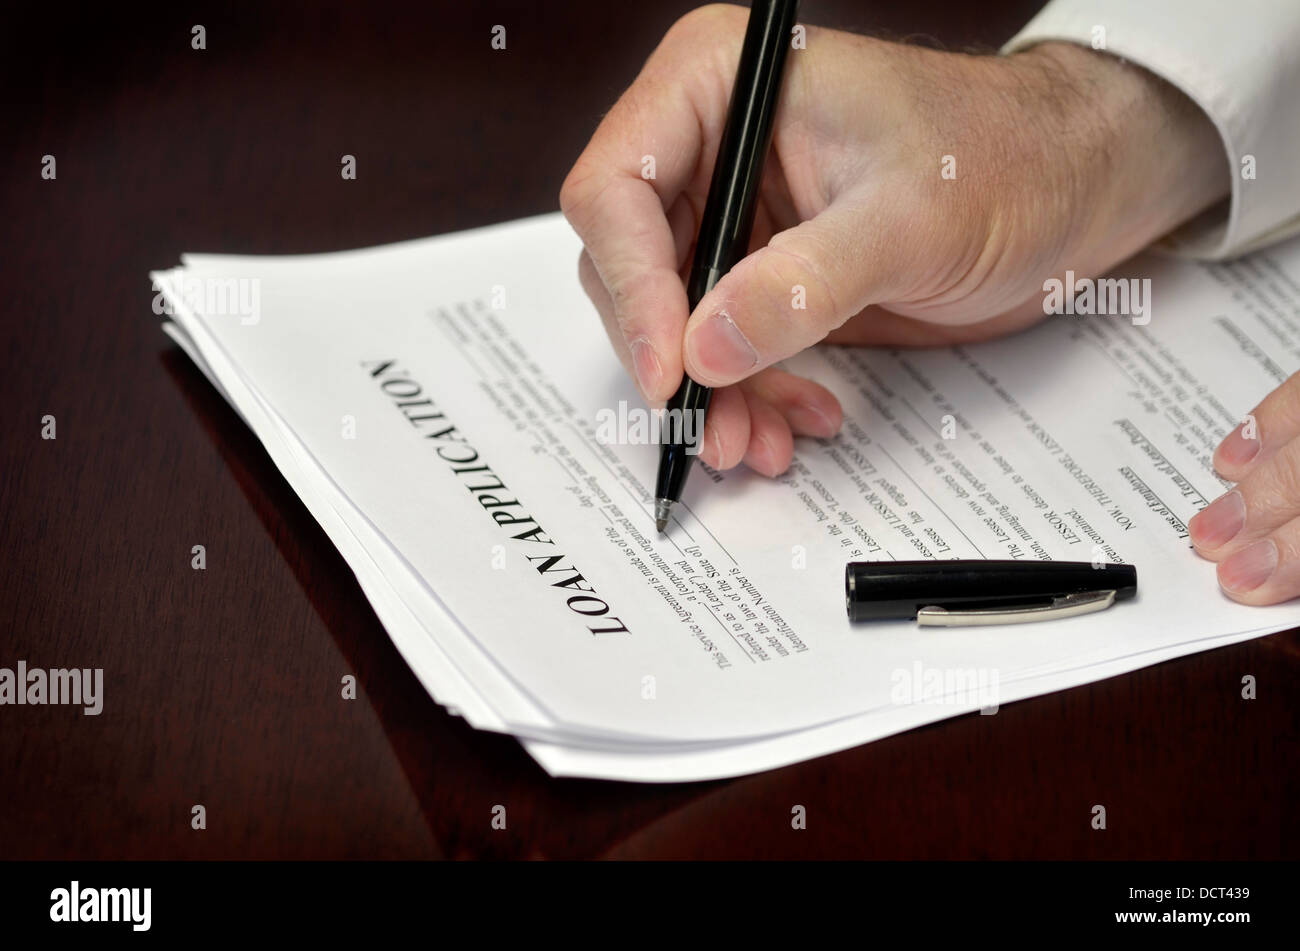 Business man signing loan application with black pen on desk Stock Photo